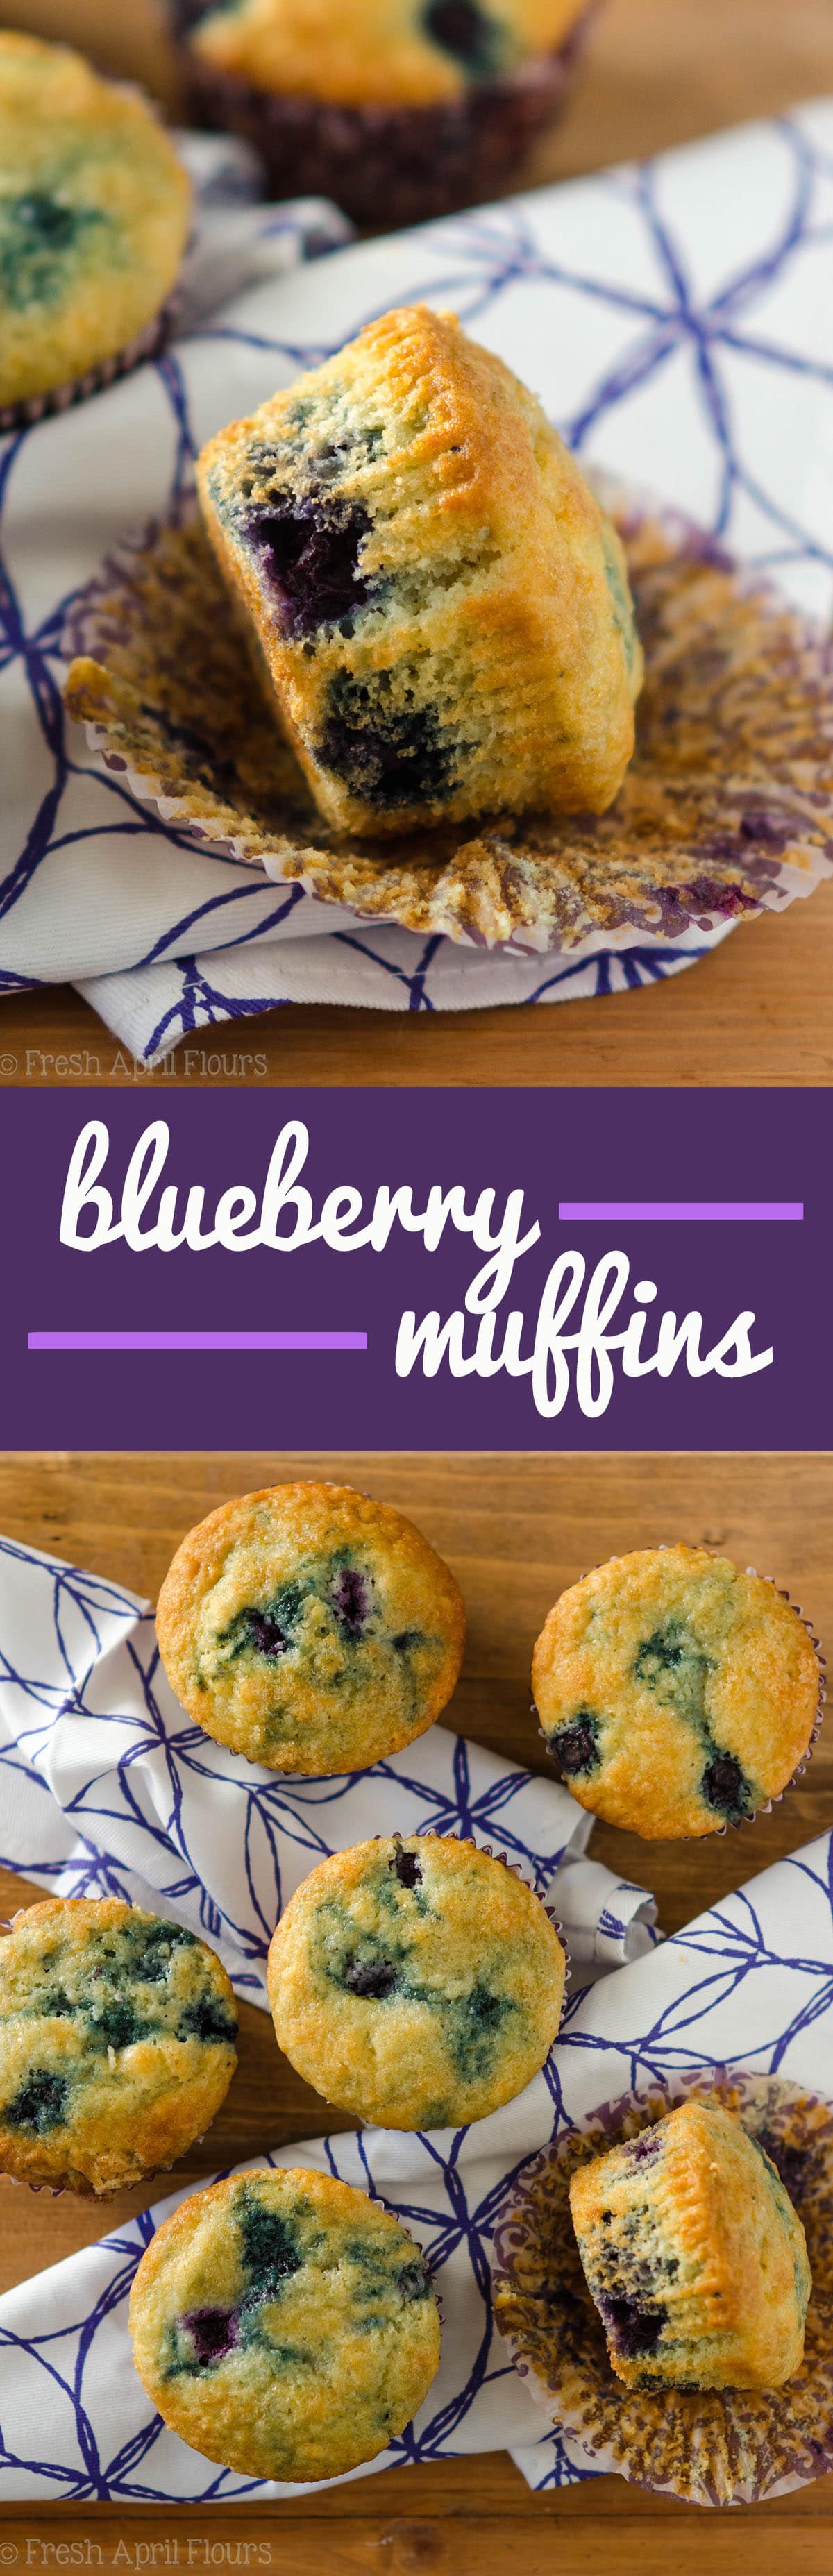 Blueberry Muffins: A quick and easy recipe for the classic! Moist, tender, and bursting with juicy blueberries. via @frshaprilflours